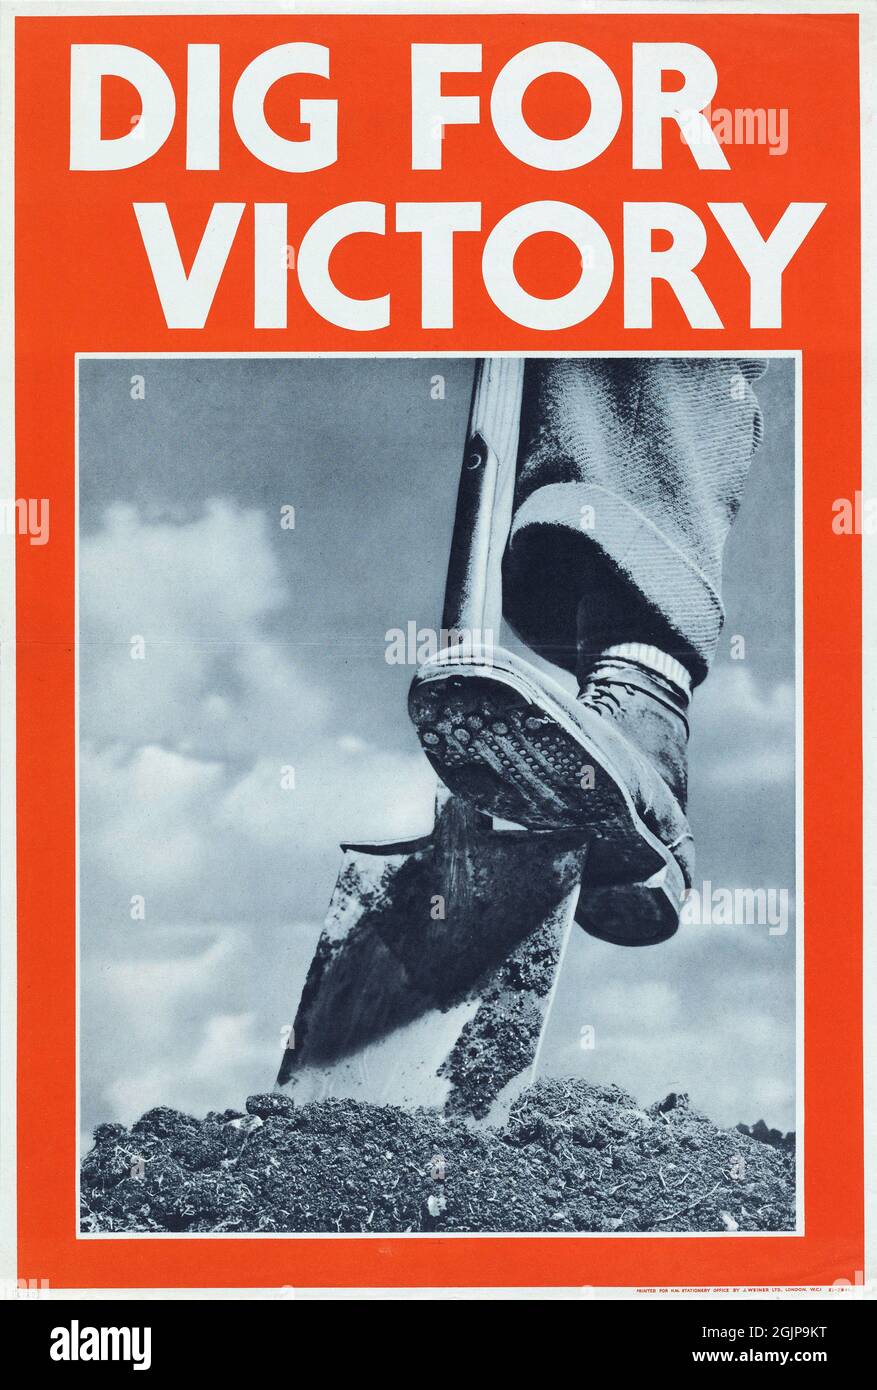 Dig for Victory', WWII poster Stock Photo